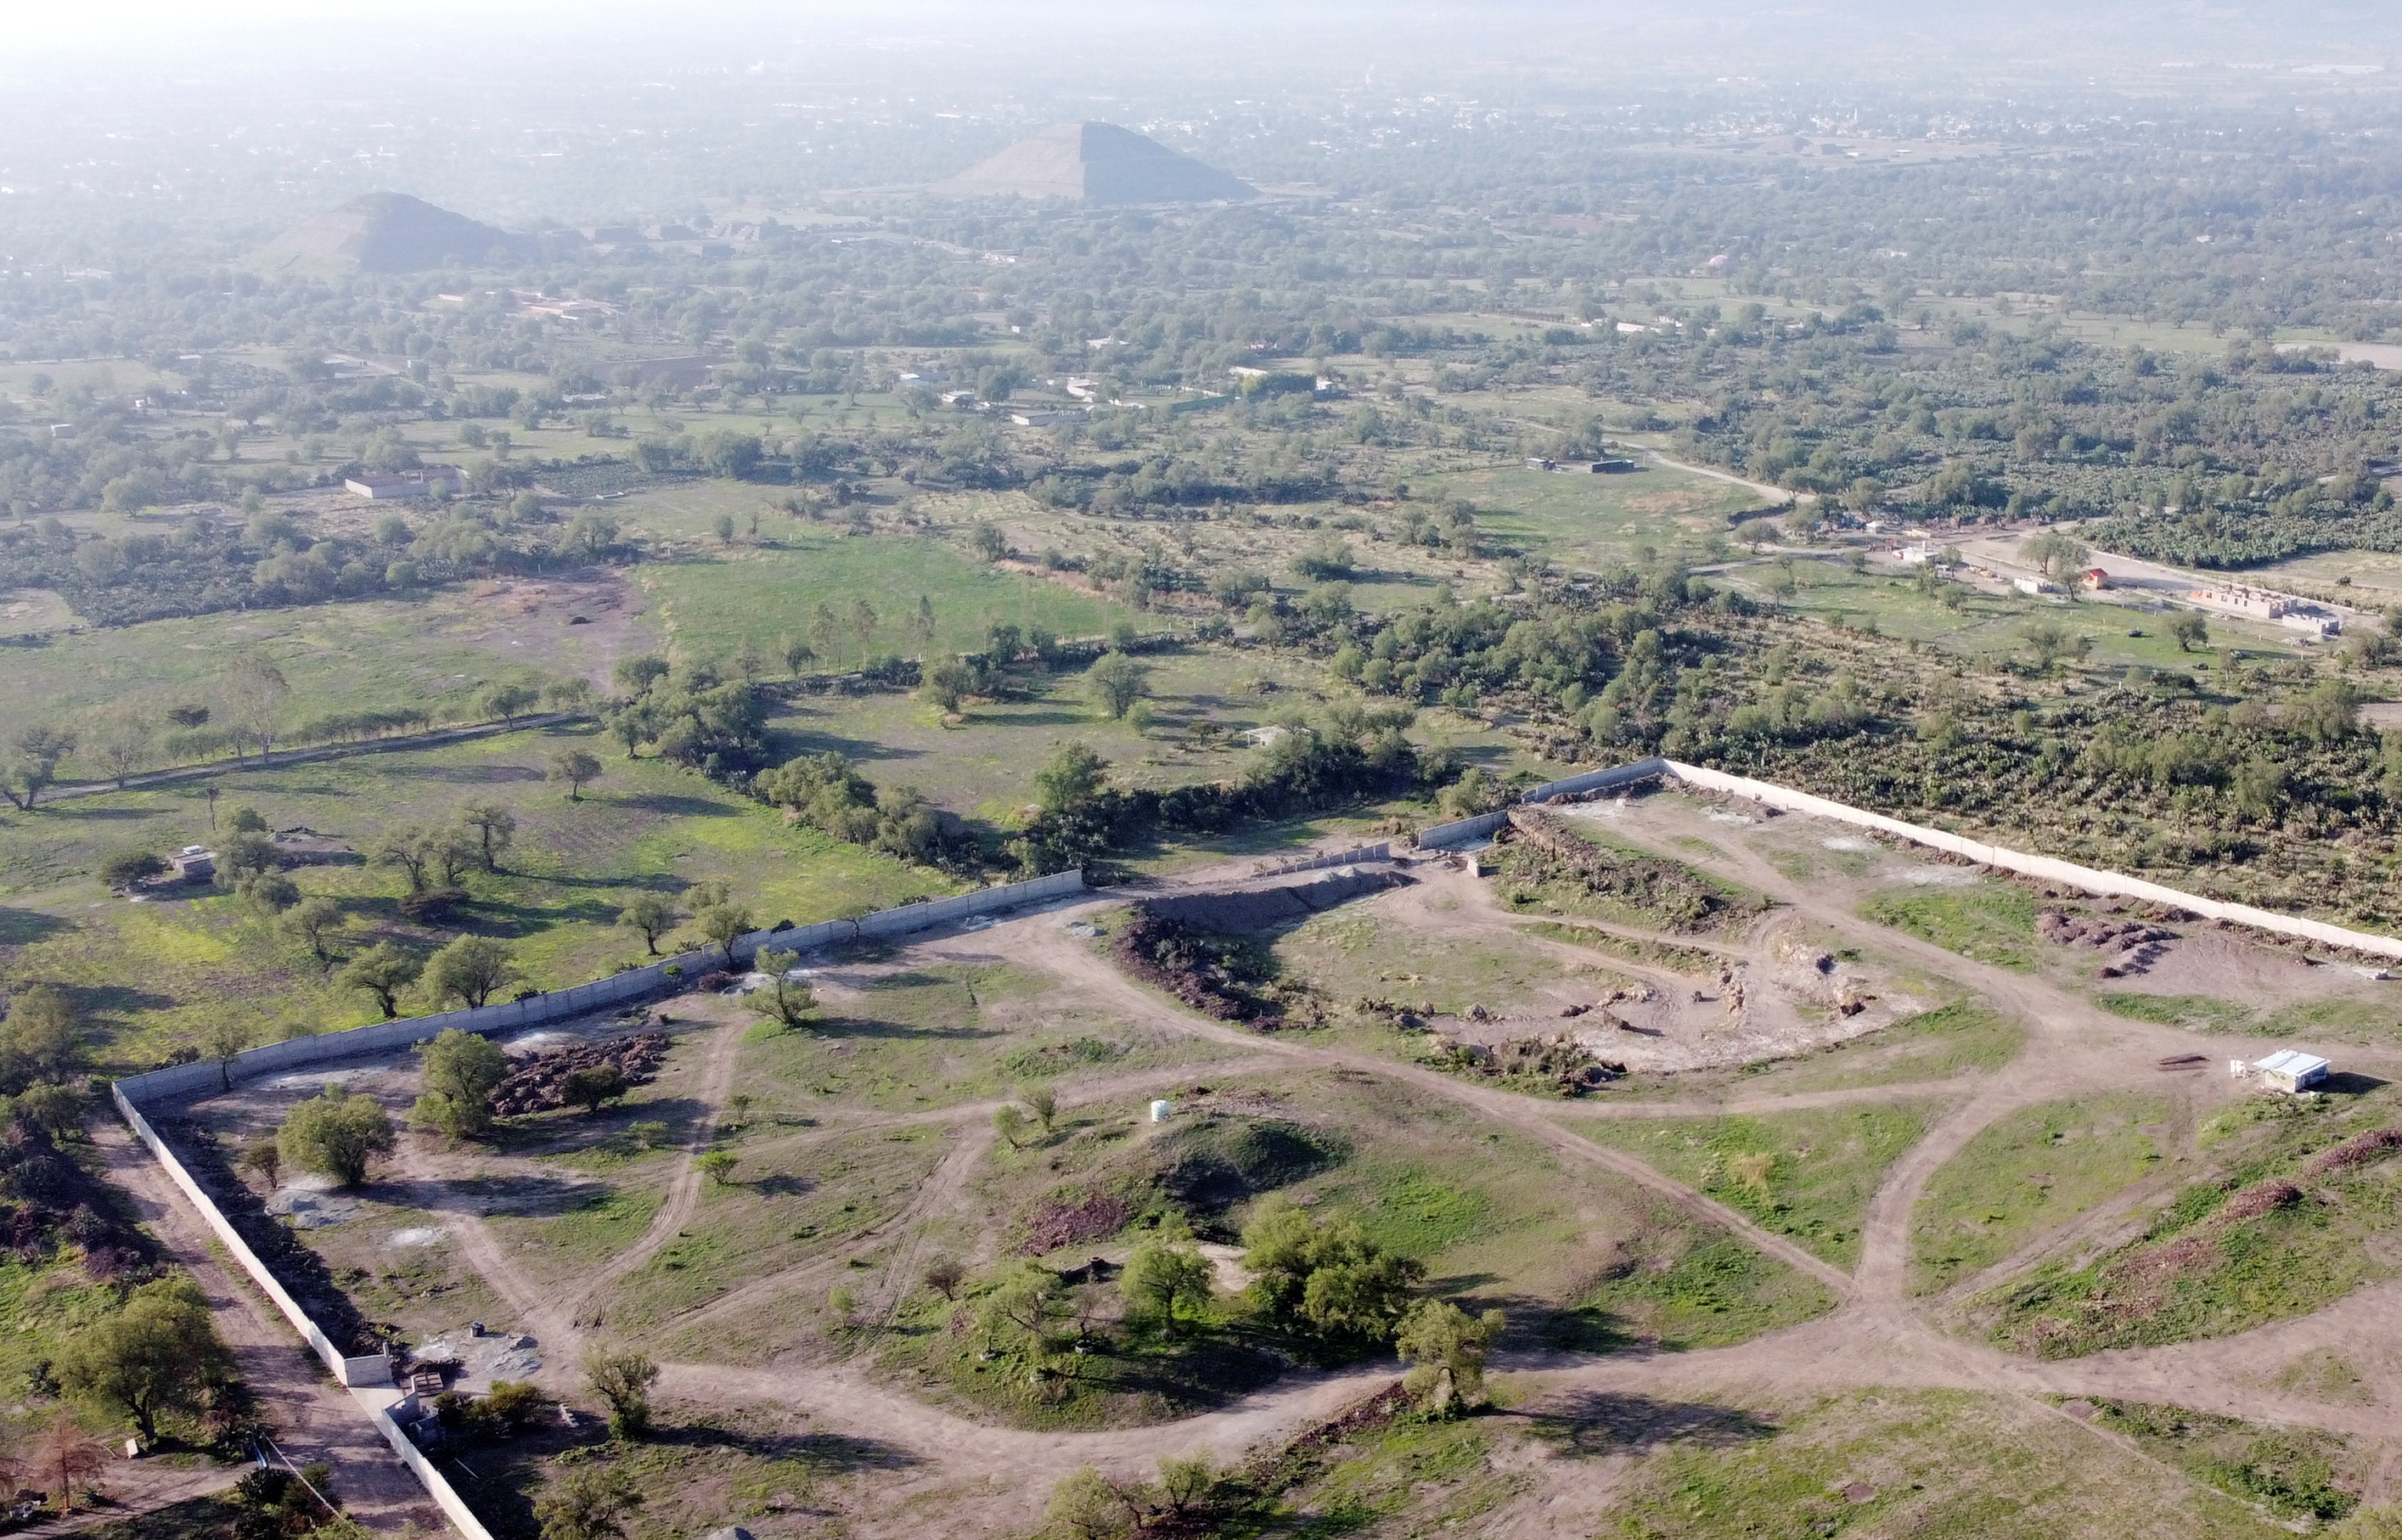 A construction site is seen near the pre-Hispanic ruins of Teotihuacan in Oztoyahualco